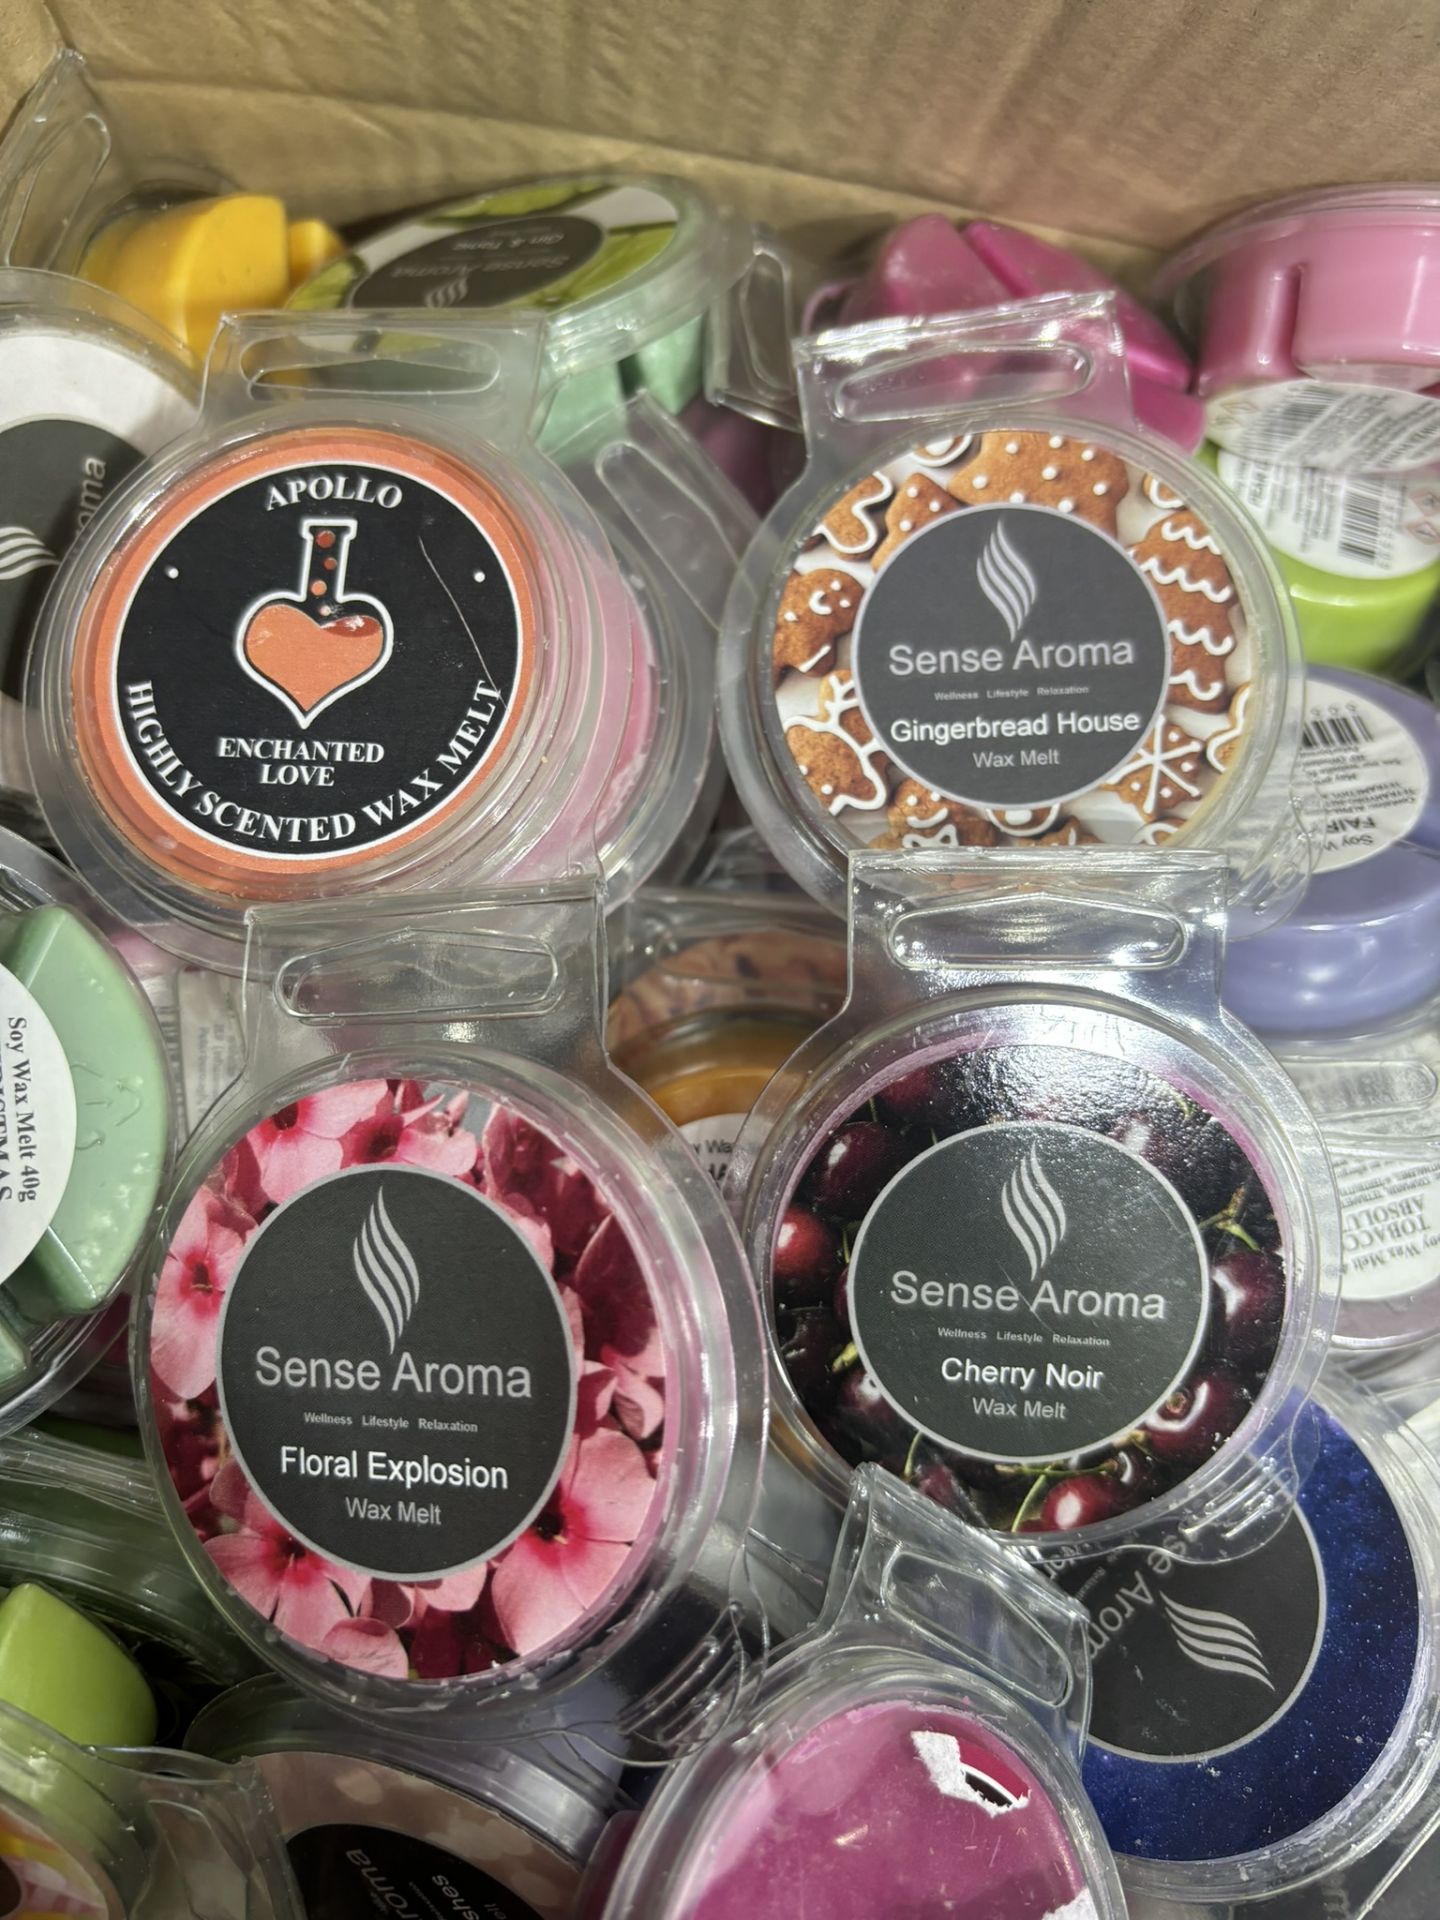 Large Quantity Of Various Scented Sense Aroma & Enchanted Love Wax Melts - Image 8 of 8